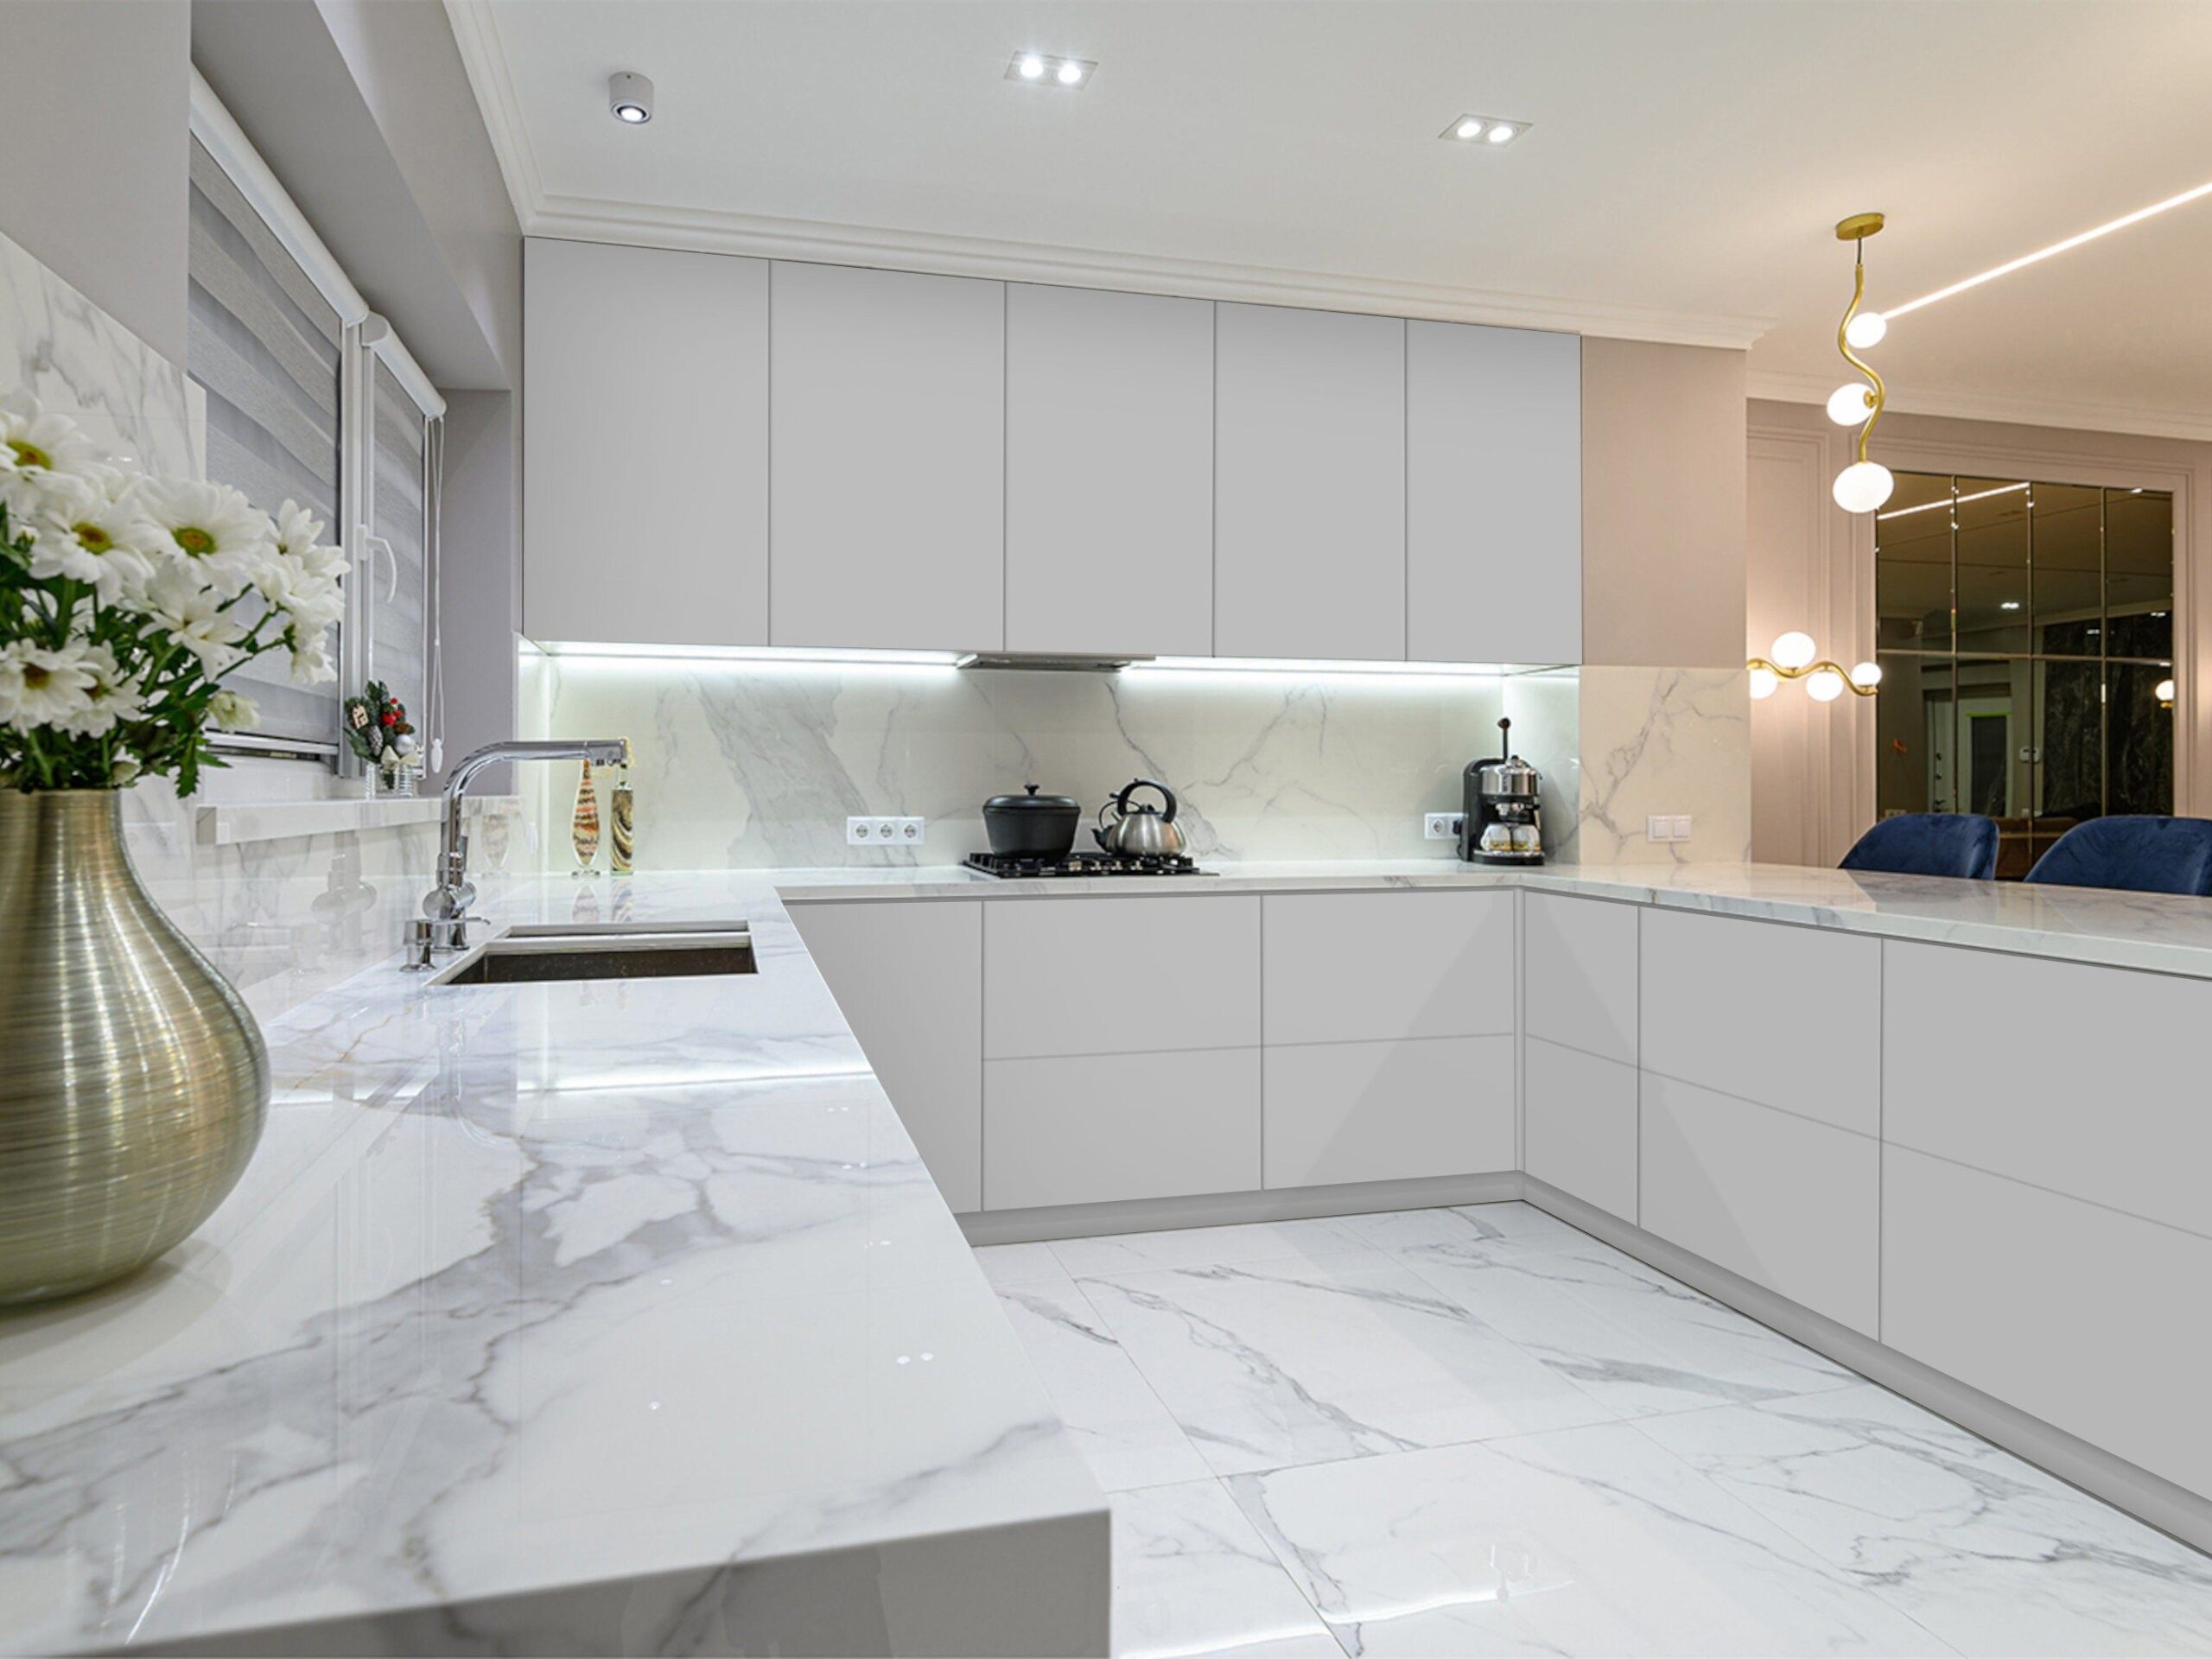 Discover the Sophistication of European-Inspired High Gloss Kitchen Cabinets